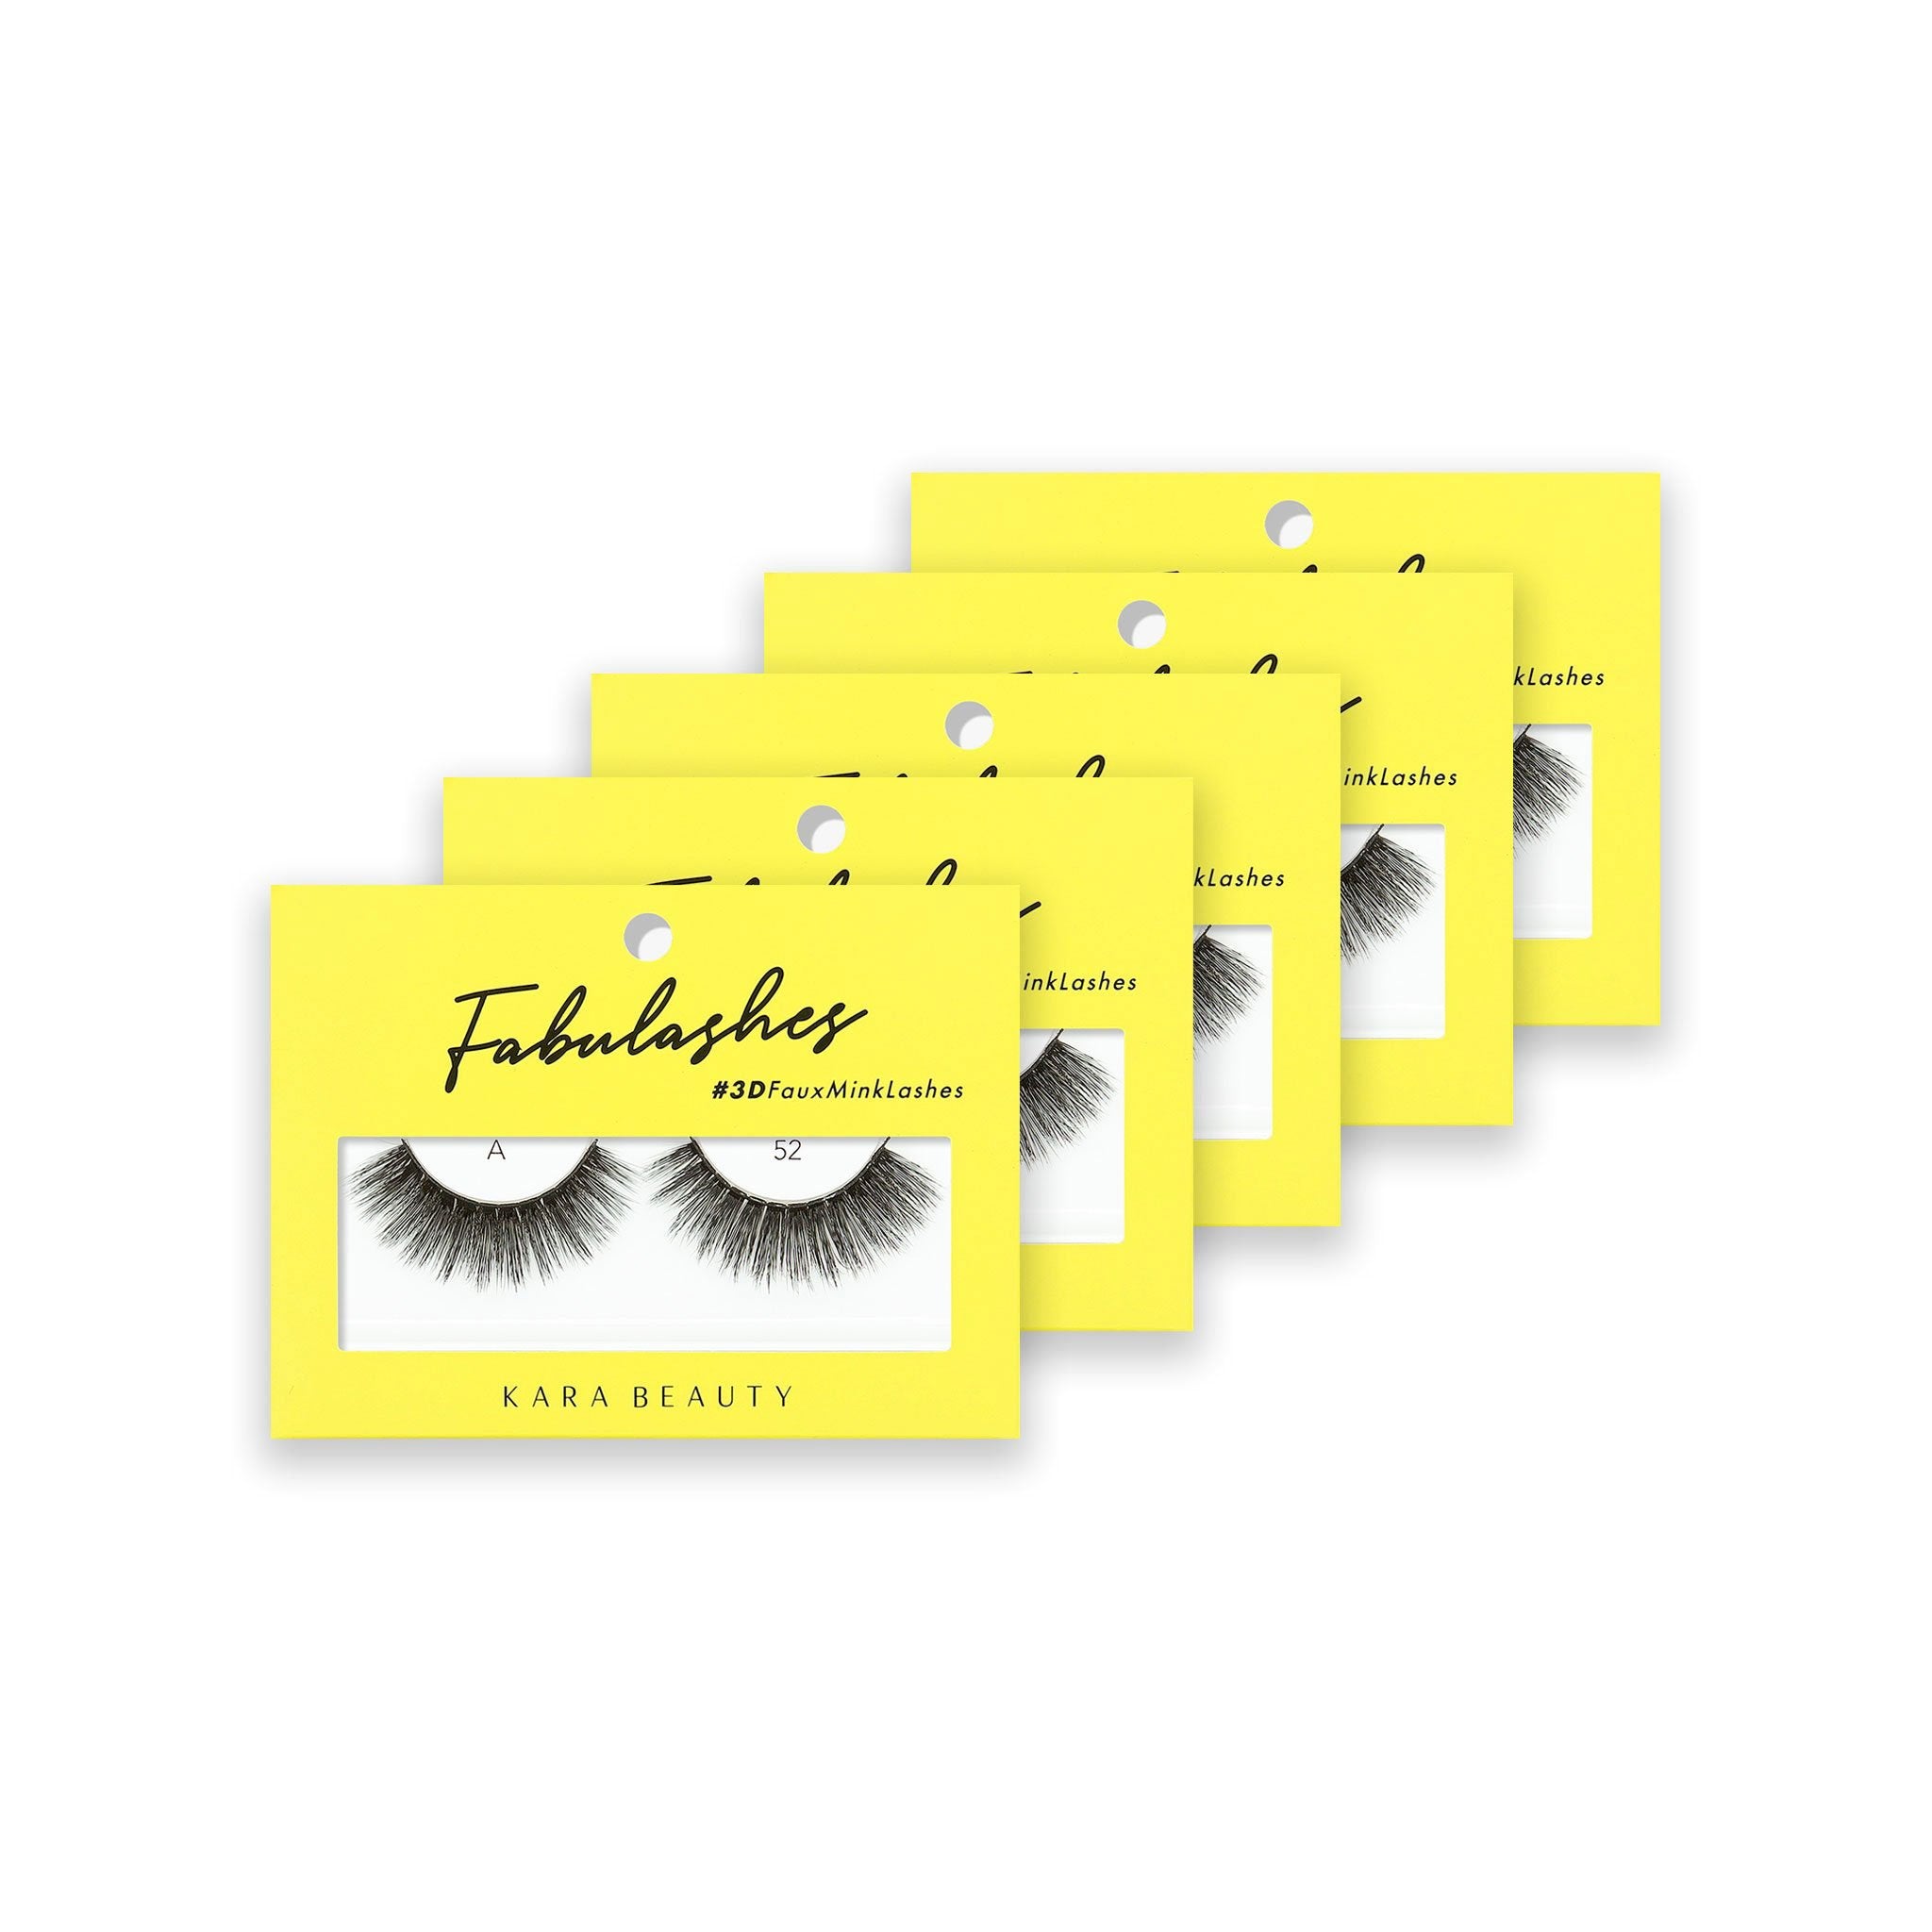 Style A52 Fabulashes 3D faux mink strip eyelashes 5 pack